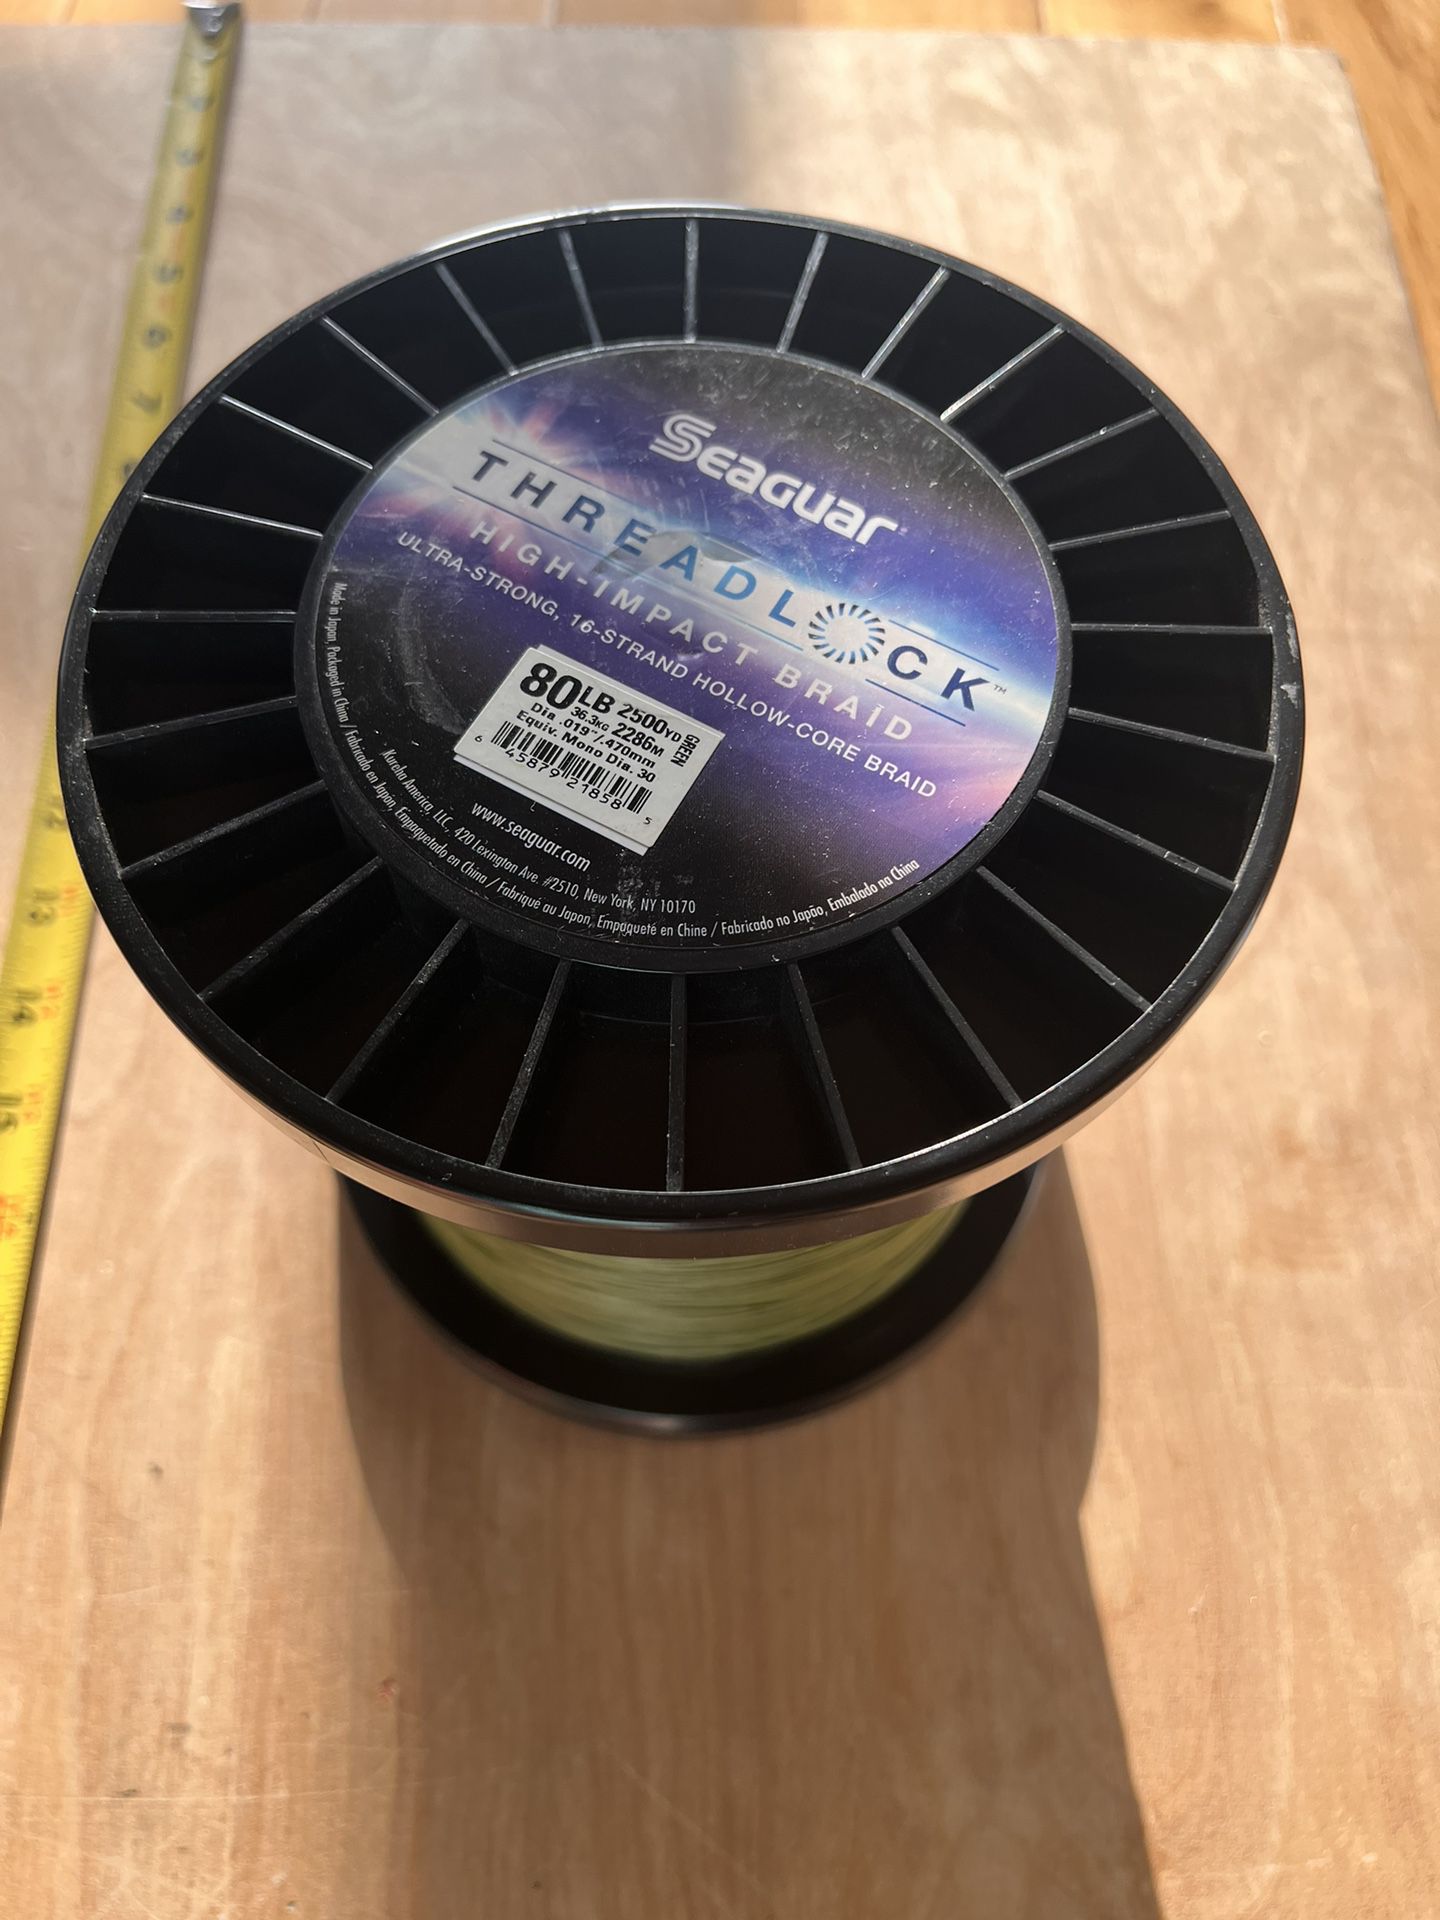 Seaguar Threadlock Braided Line, 80 Lb Test, 16 Carrier Hollow Core, 2500  Yd Spool for Sale in South Pasadena, CA - OfferUp